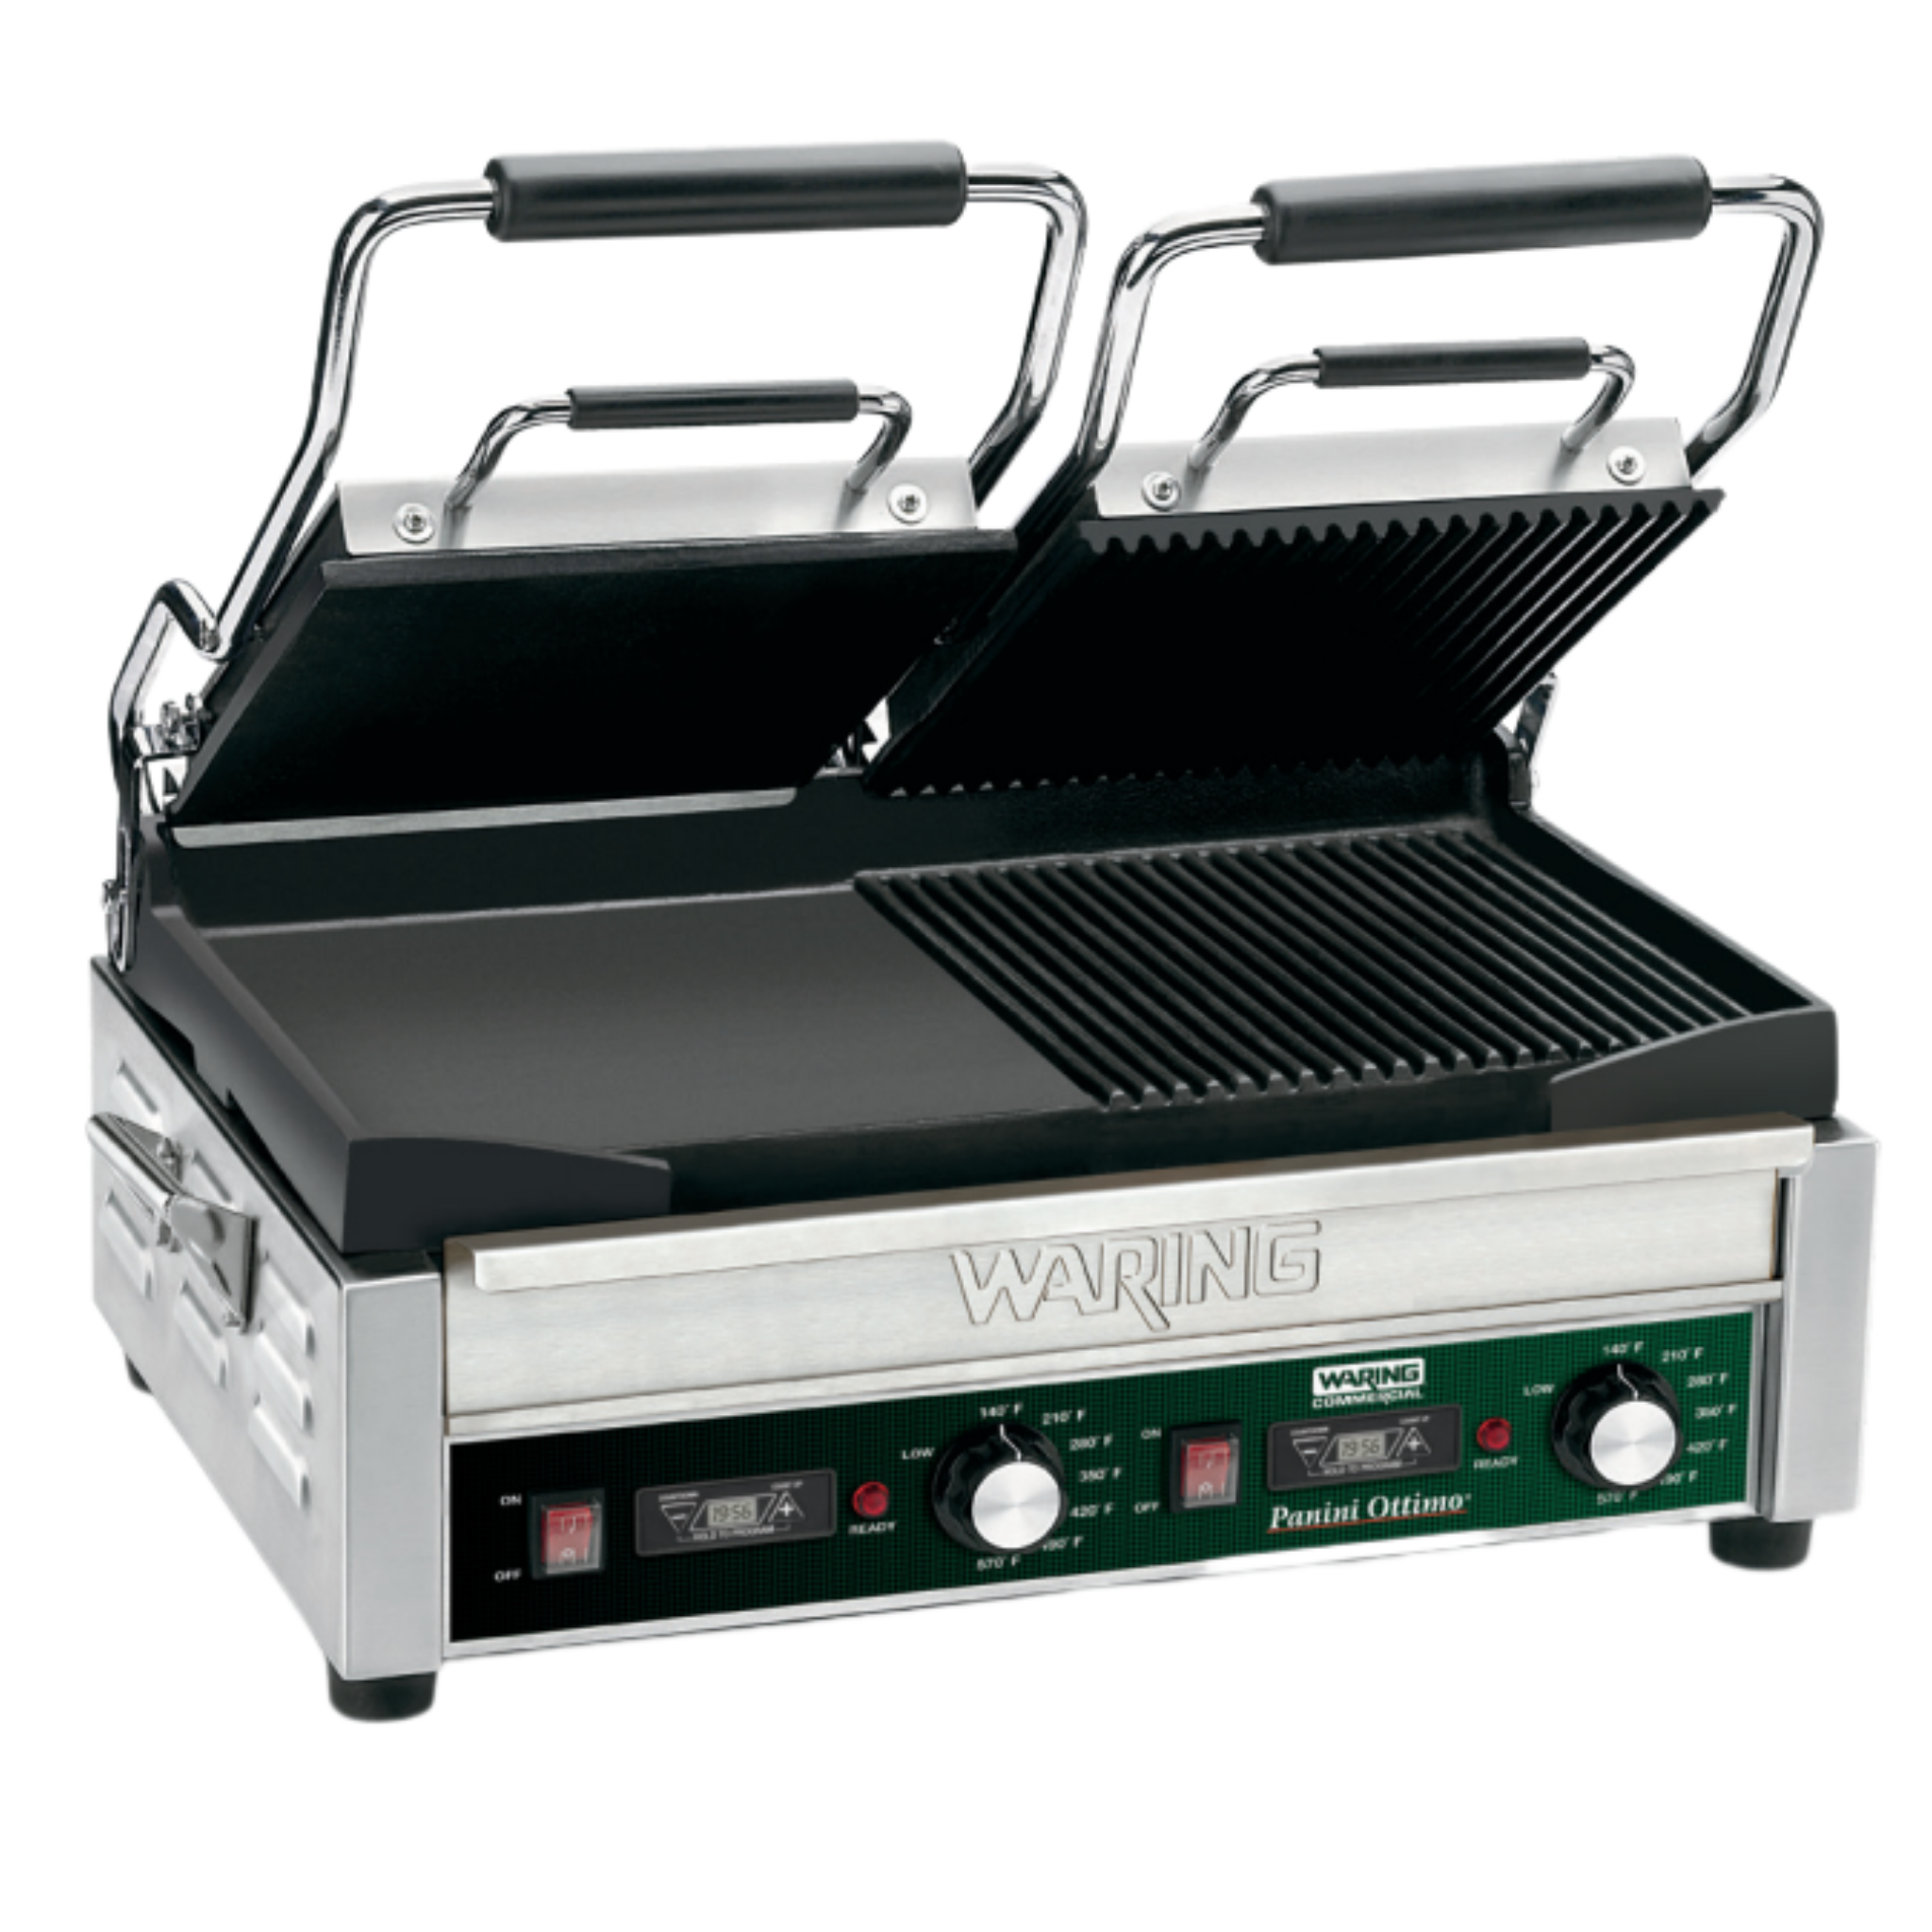 WDG300 Hybrid Panini Ottimo - Double Panini & Flat Grill by Waring Commercial